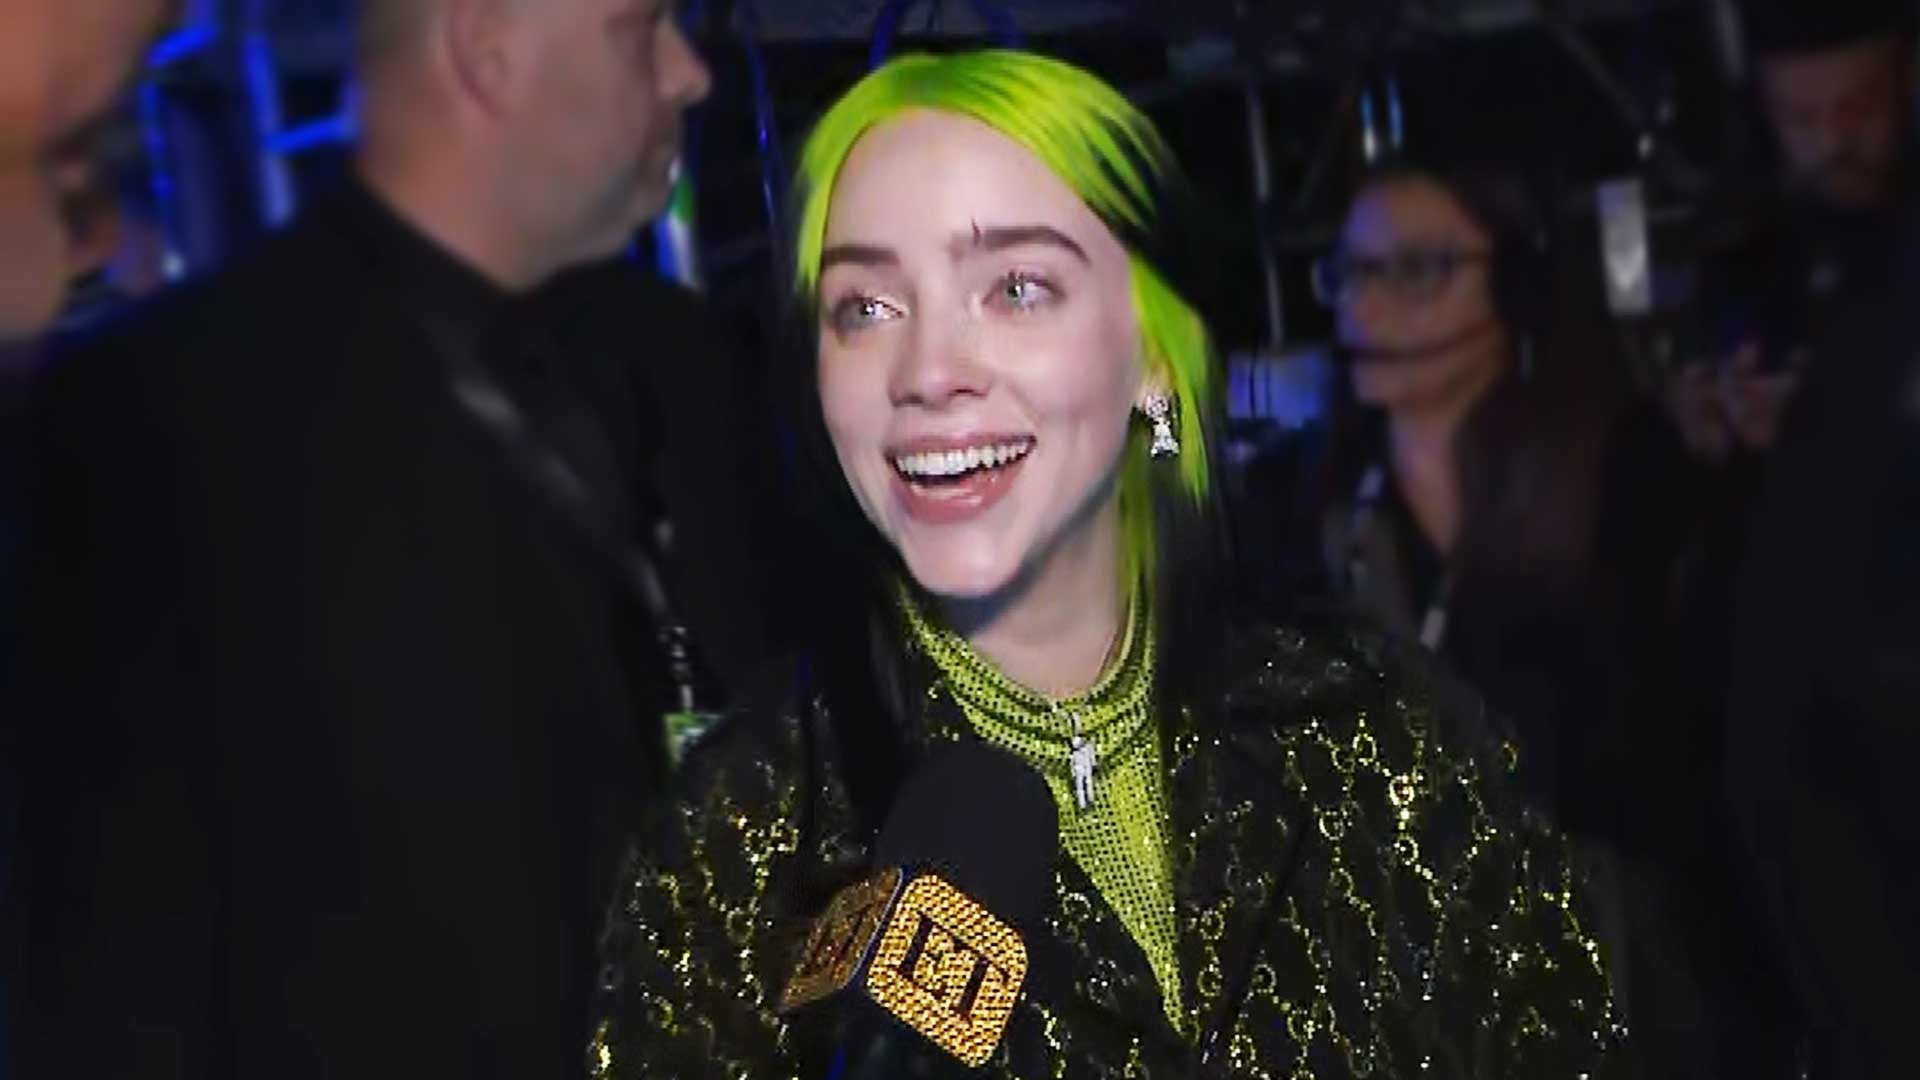 Billie Eilish Covers The Beatles Yesterday For Oscars In